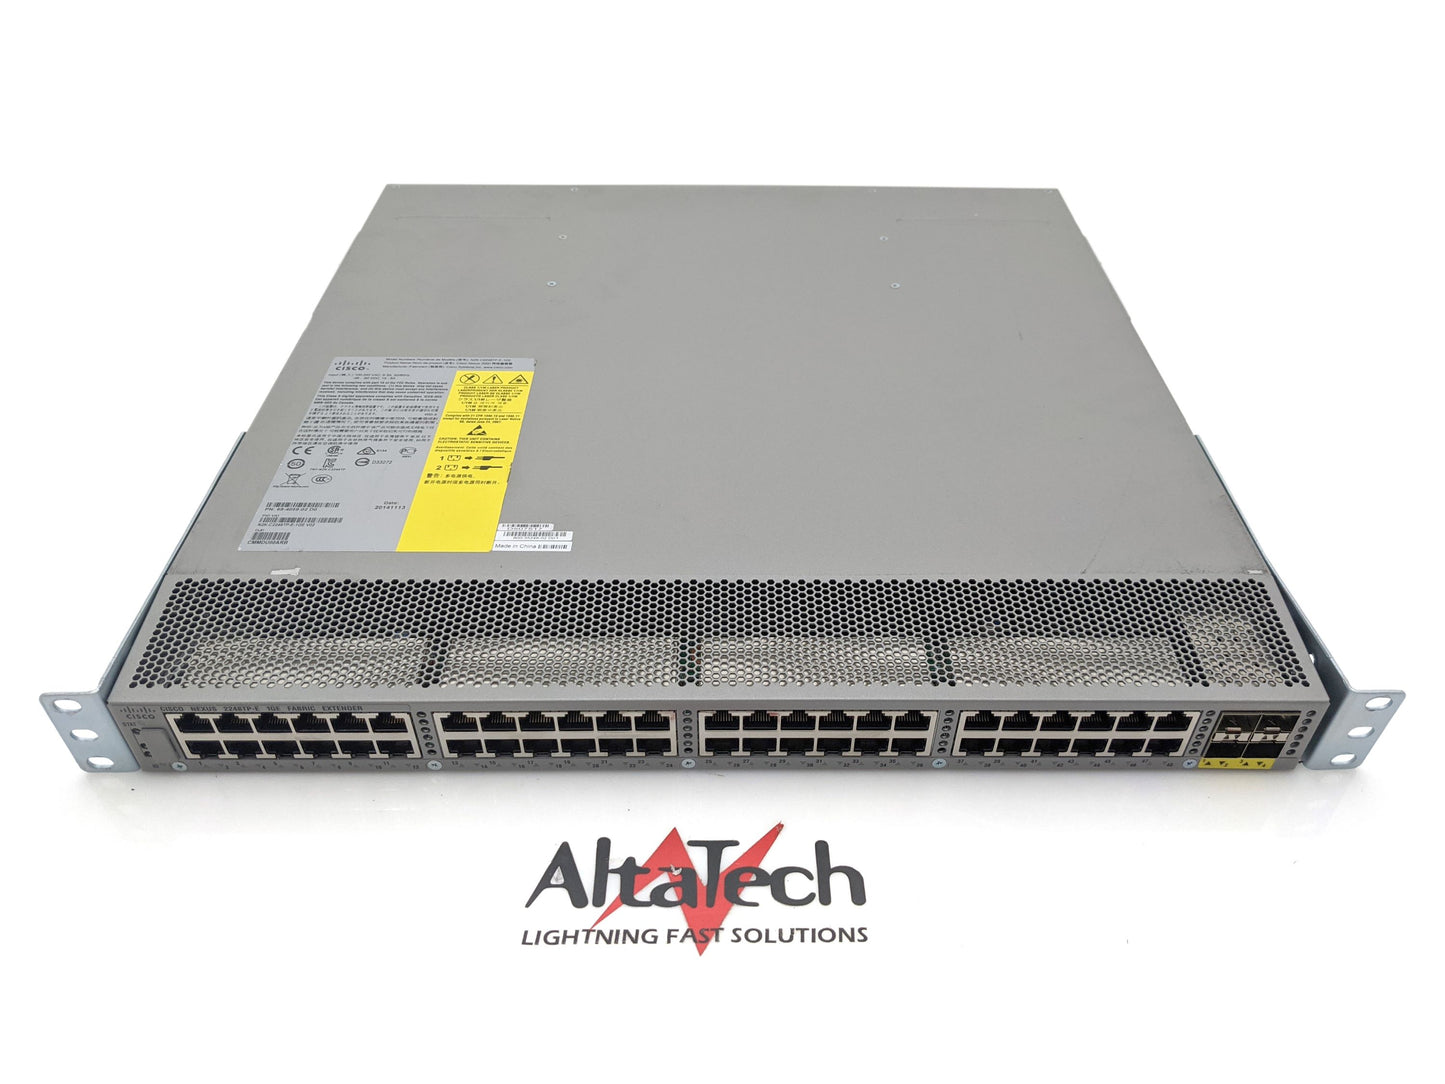 Cisco N2K-C2248TP-E-1GE Nexus 2248TP-E 48-Port 100/1000BASE-T Ethernet Fabric Extender Switch, Used